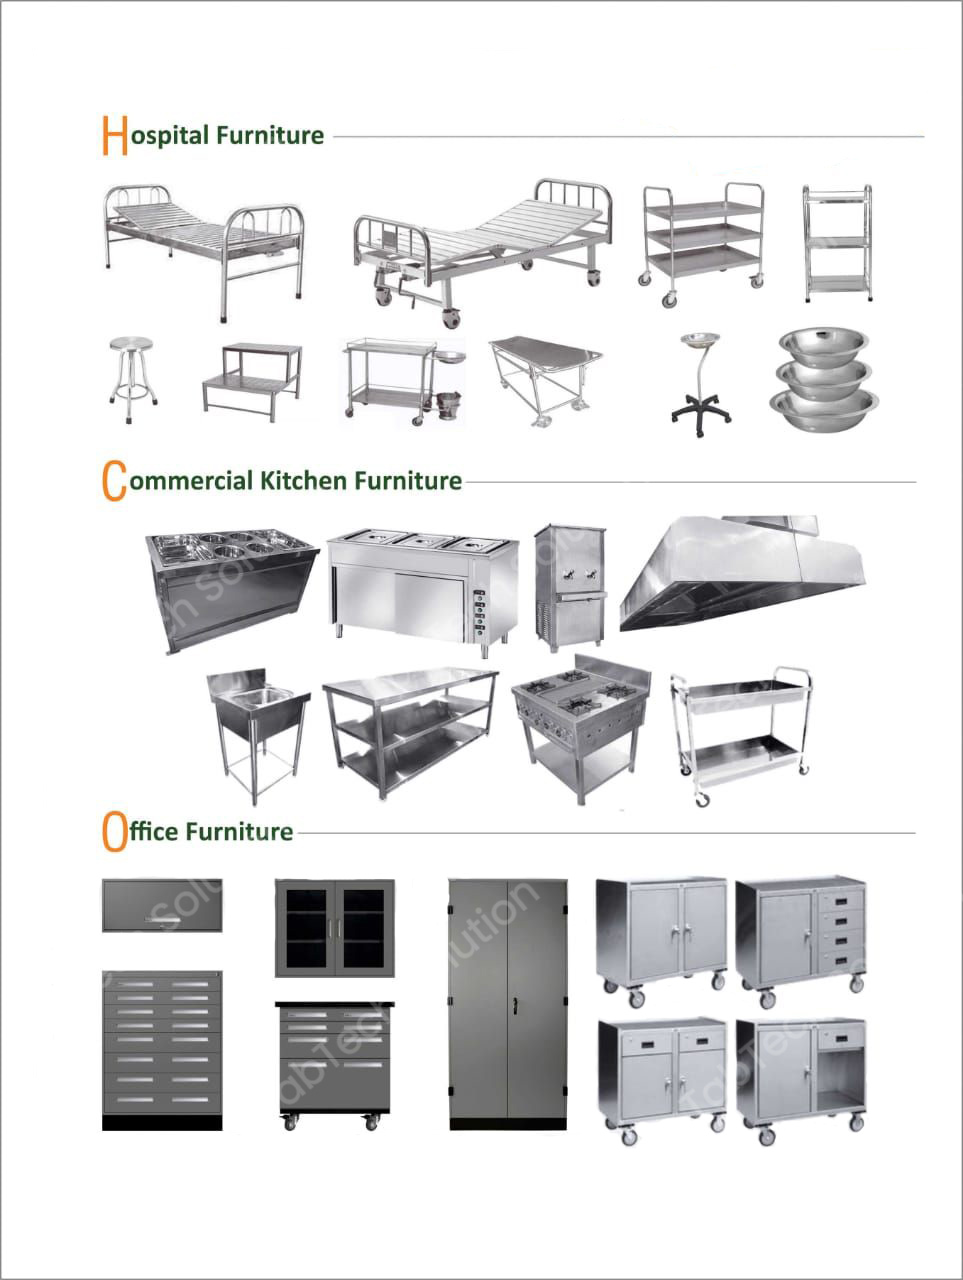 Clean Room Furniture, Hospital Kichen & Office CRF, Supplier and Manufacturer in Ahmedabad, Gujarat, India